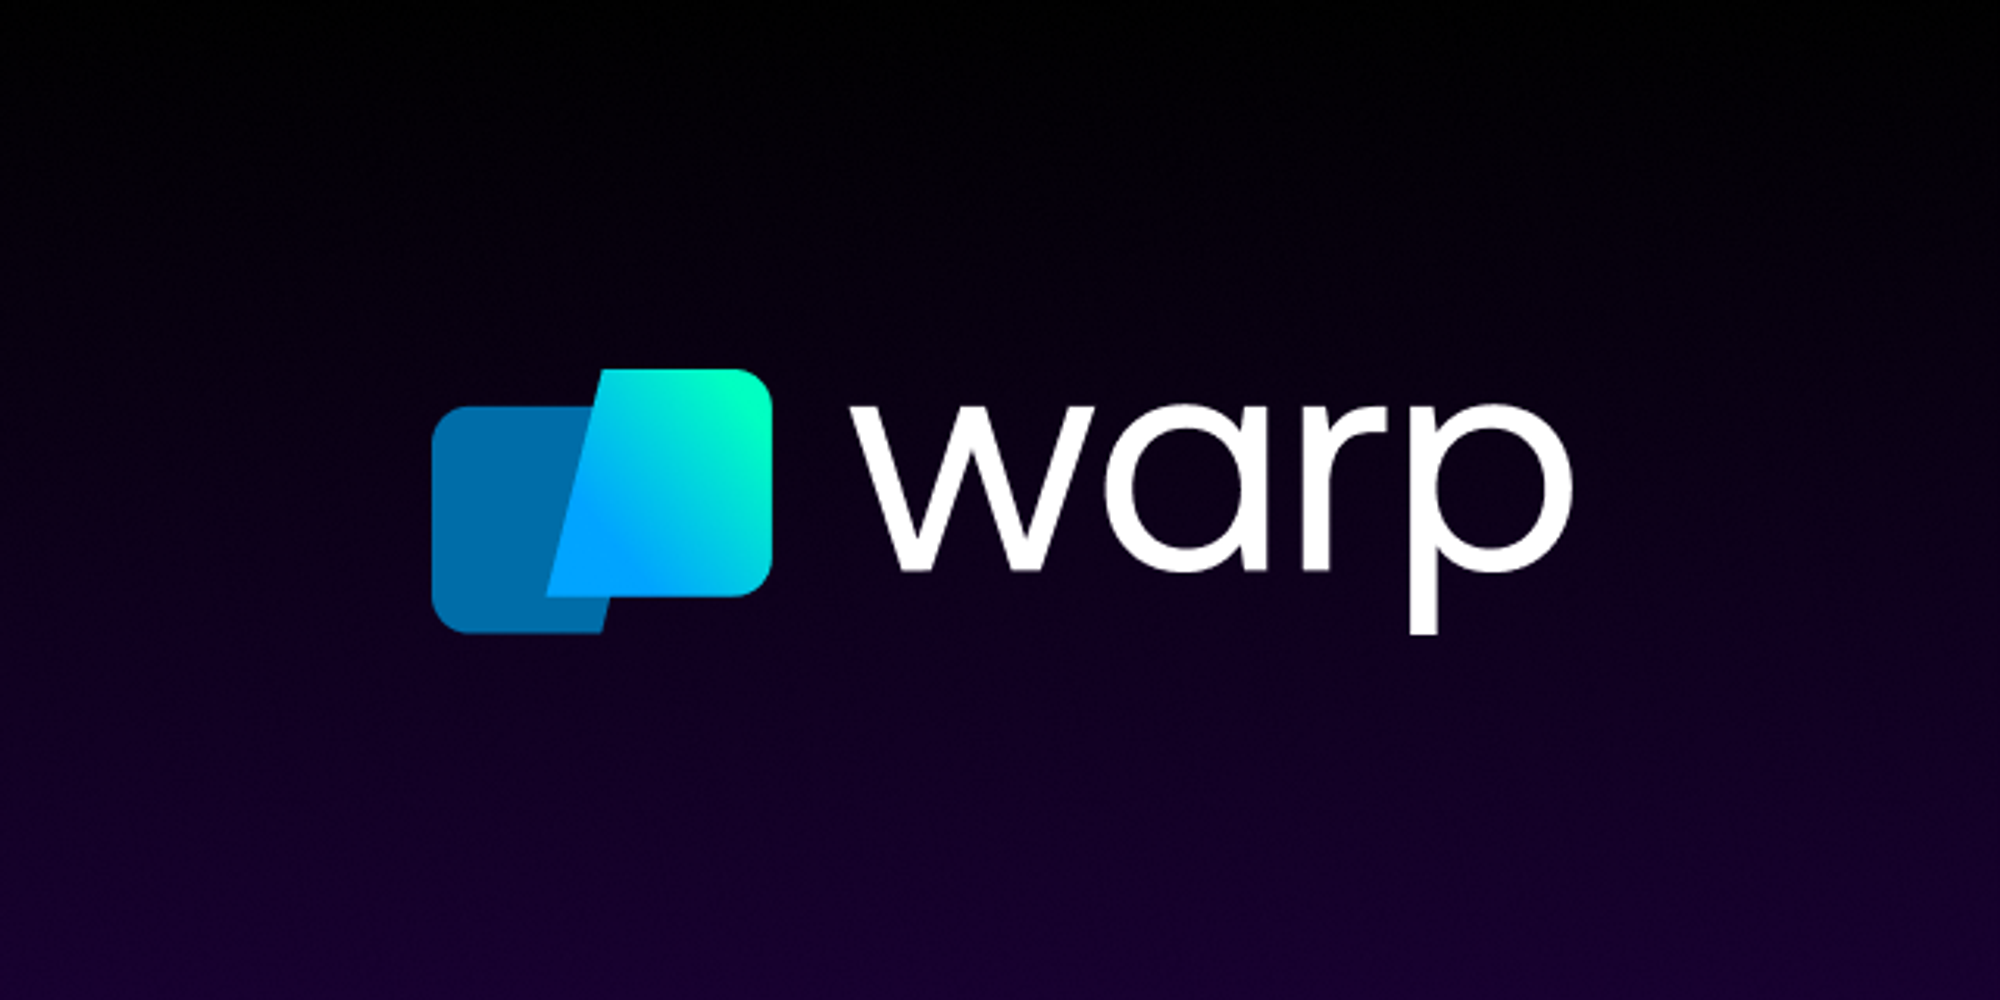 GitHub - warpdotdev/Warp: Warp is a blazingly-fast modern Rust based GPU-accelerated terminal built to make you and your team more productive.